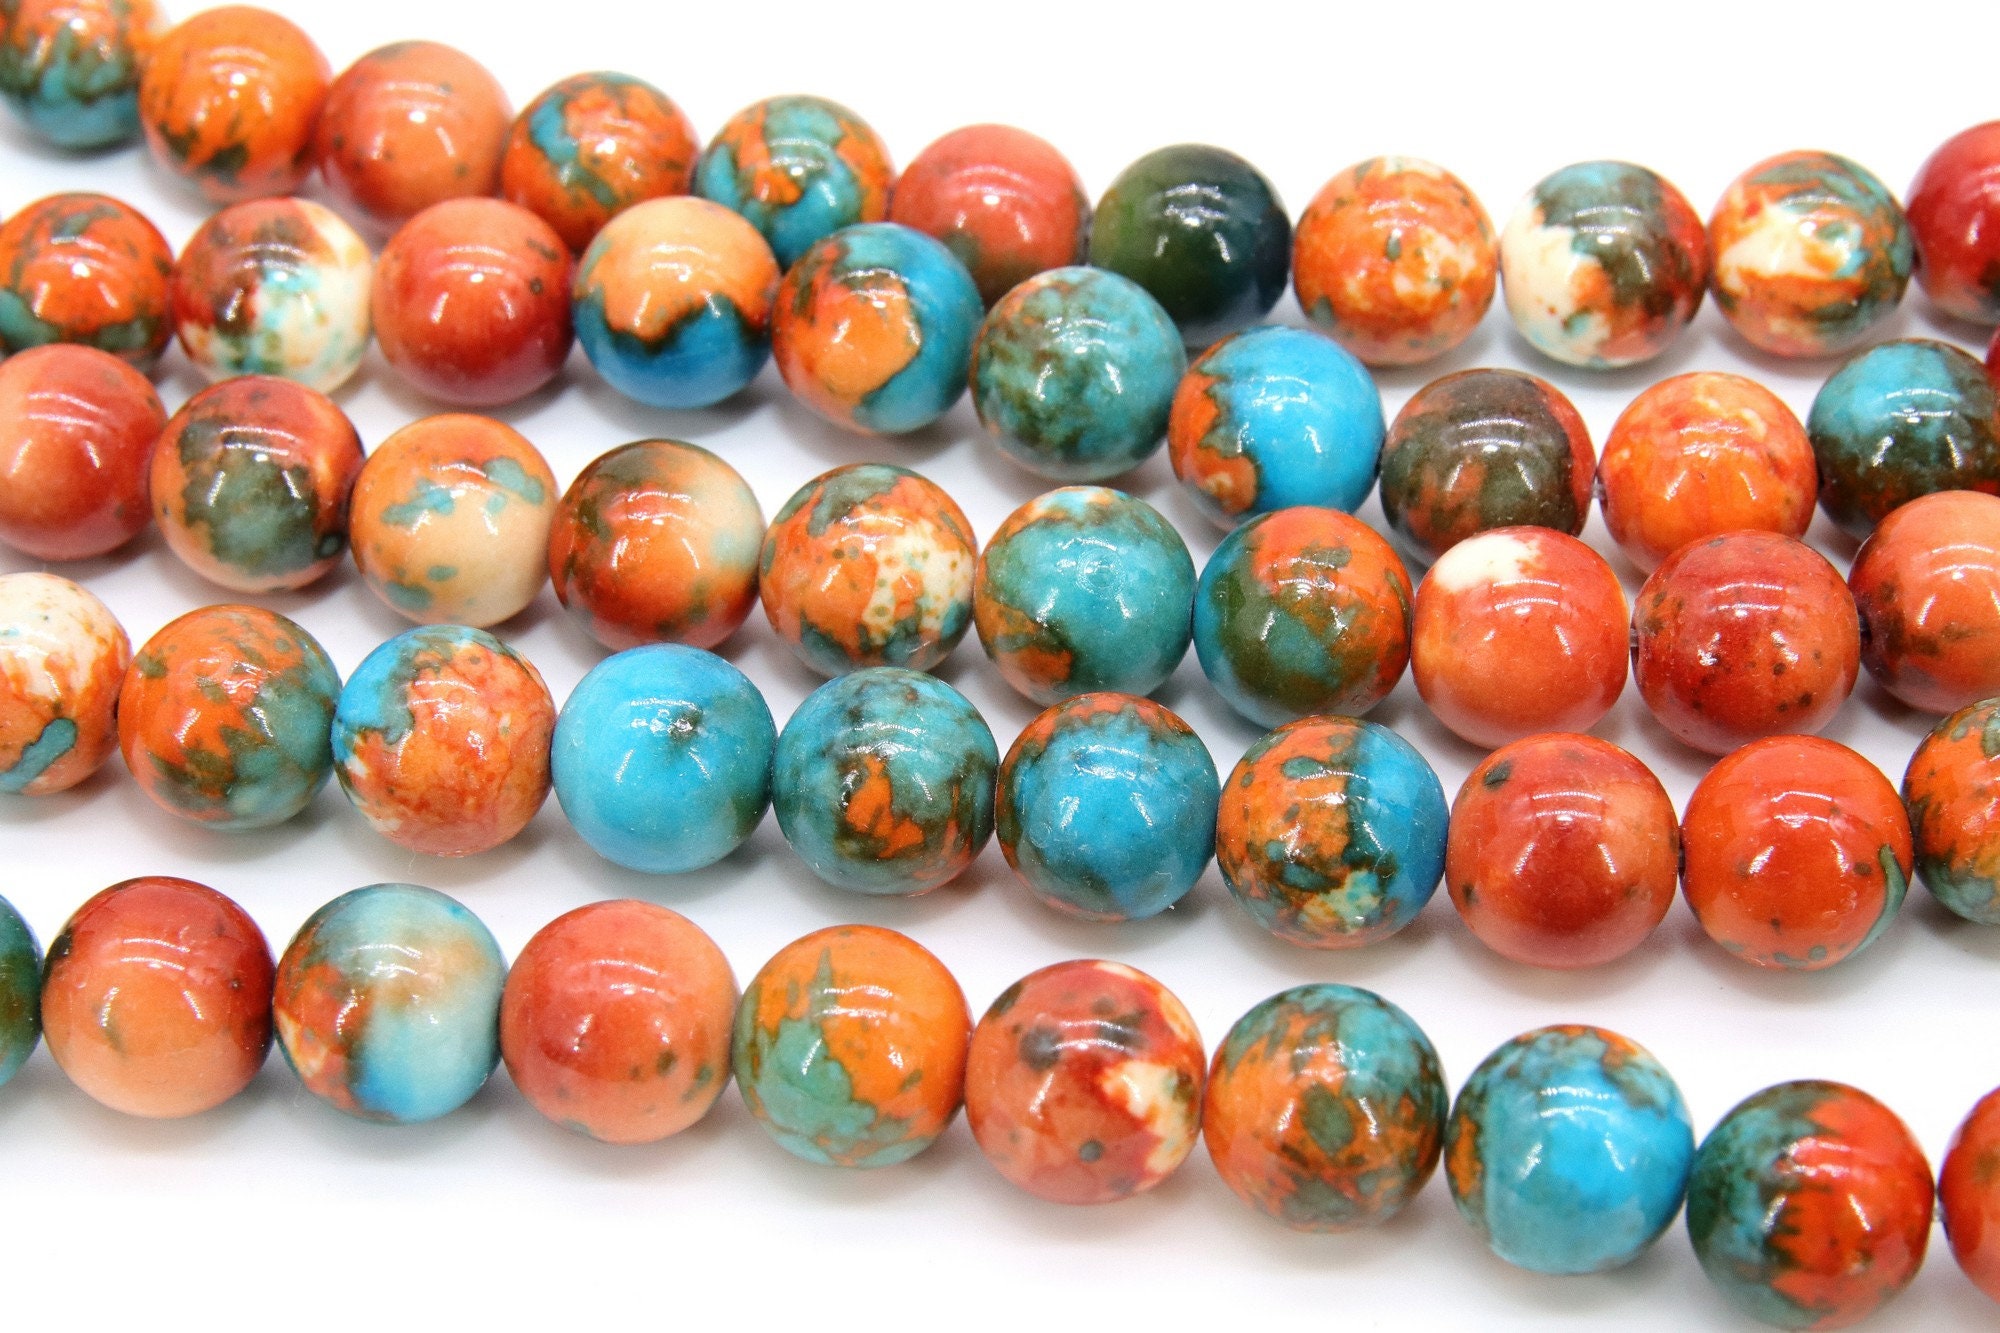  8 mm Red Orange Yellow Green Cyan Bluish Violet Fashion Glass  Beads Bracelet Glamour Men And Women Send Gifts And Amulet lv se 10mm  19beads : Clothing, Shoes & Jewelry